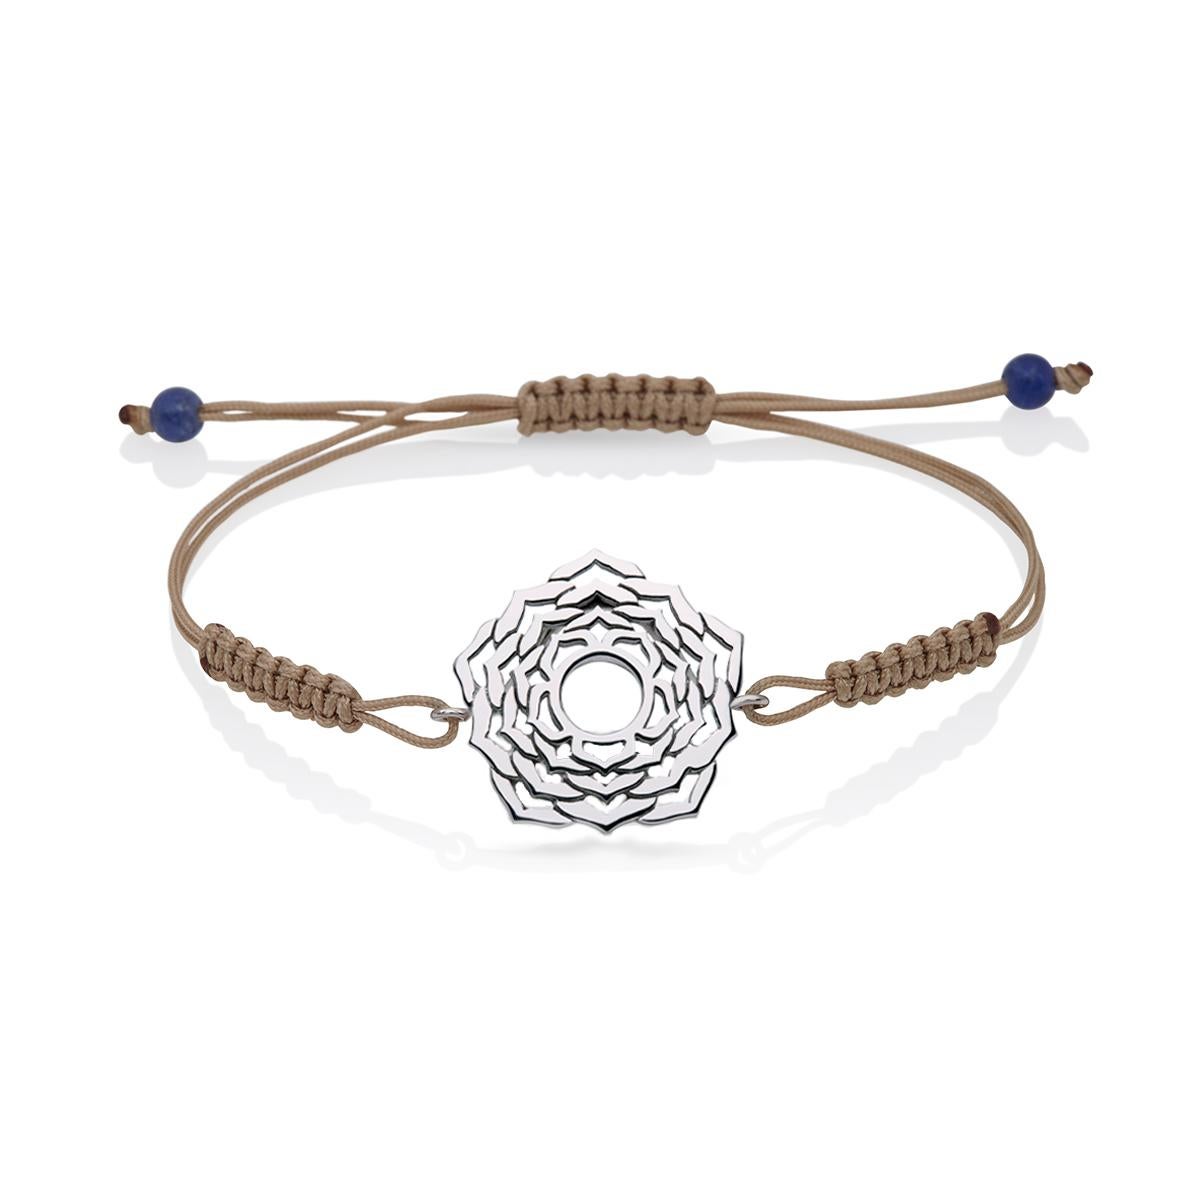 Macrame Yoga Bracelet with Sahasrara the Crown Chakra in 14Kt White Gold with Brown Cord and Lapiz lazuli beads
A very beautiful and wearable macrame bracelet made of 14Kt Gold with the Sahasrara - the Crown Chakra. It will match with everything in